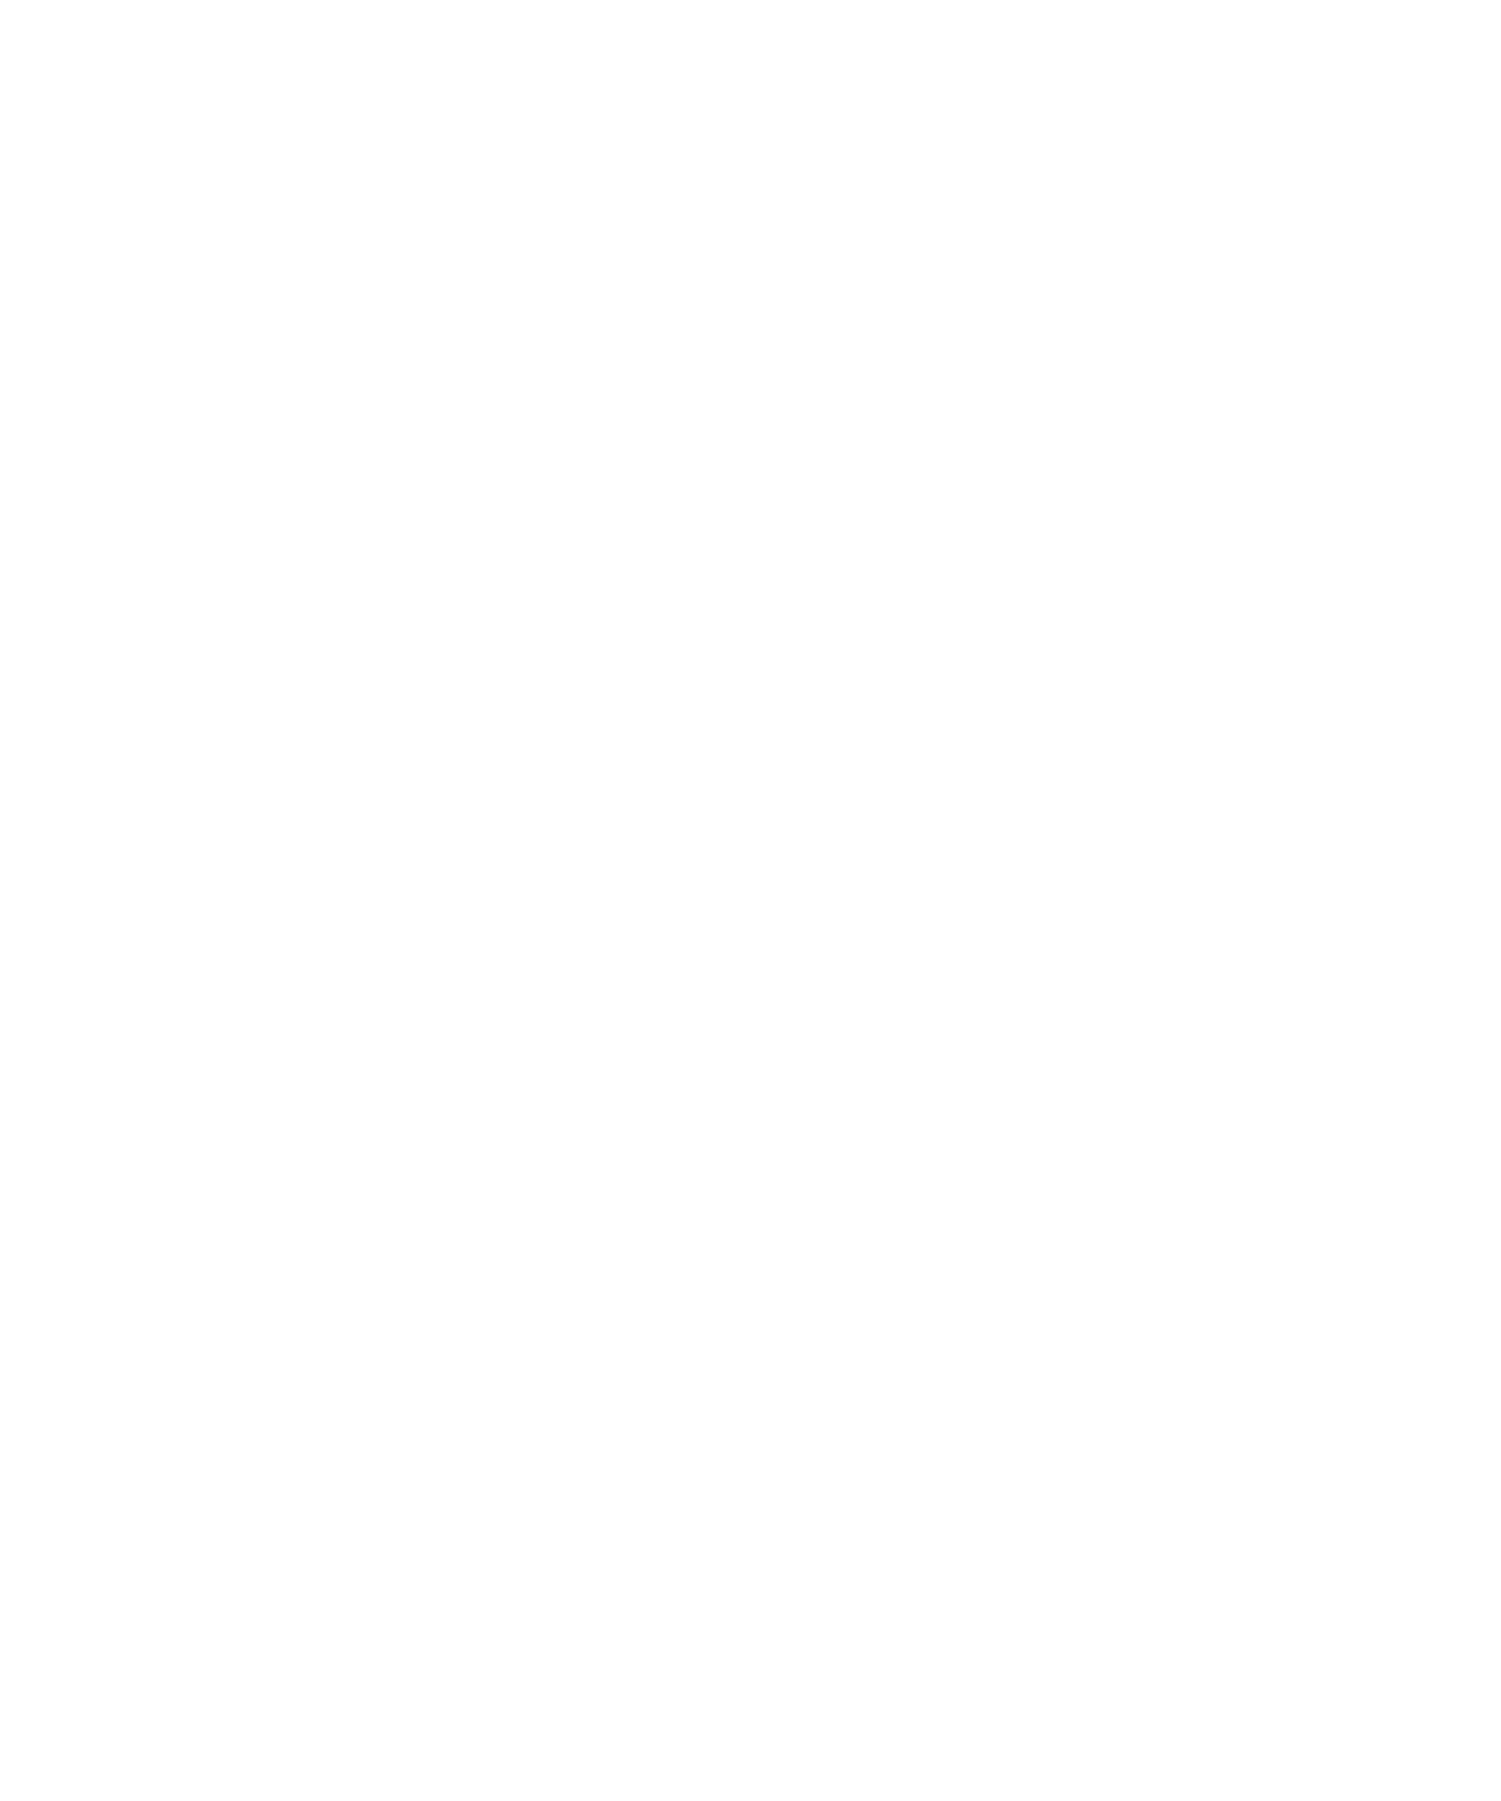 6th and peabody logo with Yee-Haw Brewing and Ol Smoky Moonshine logo